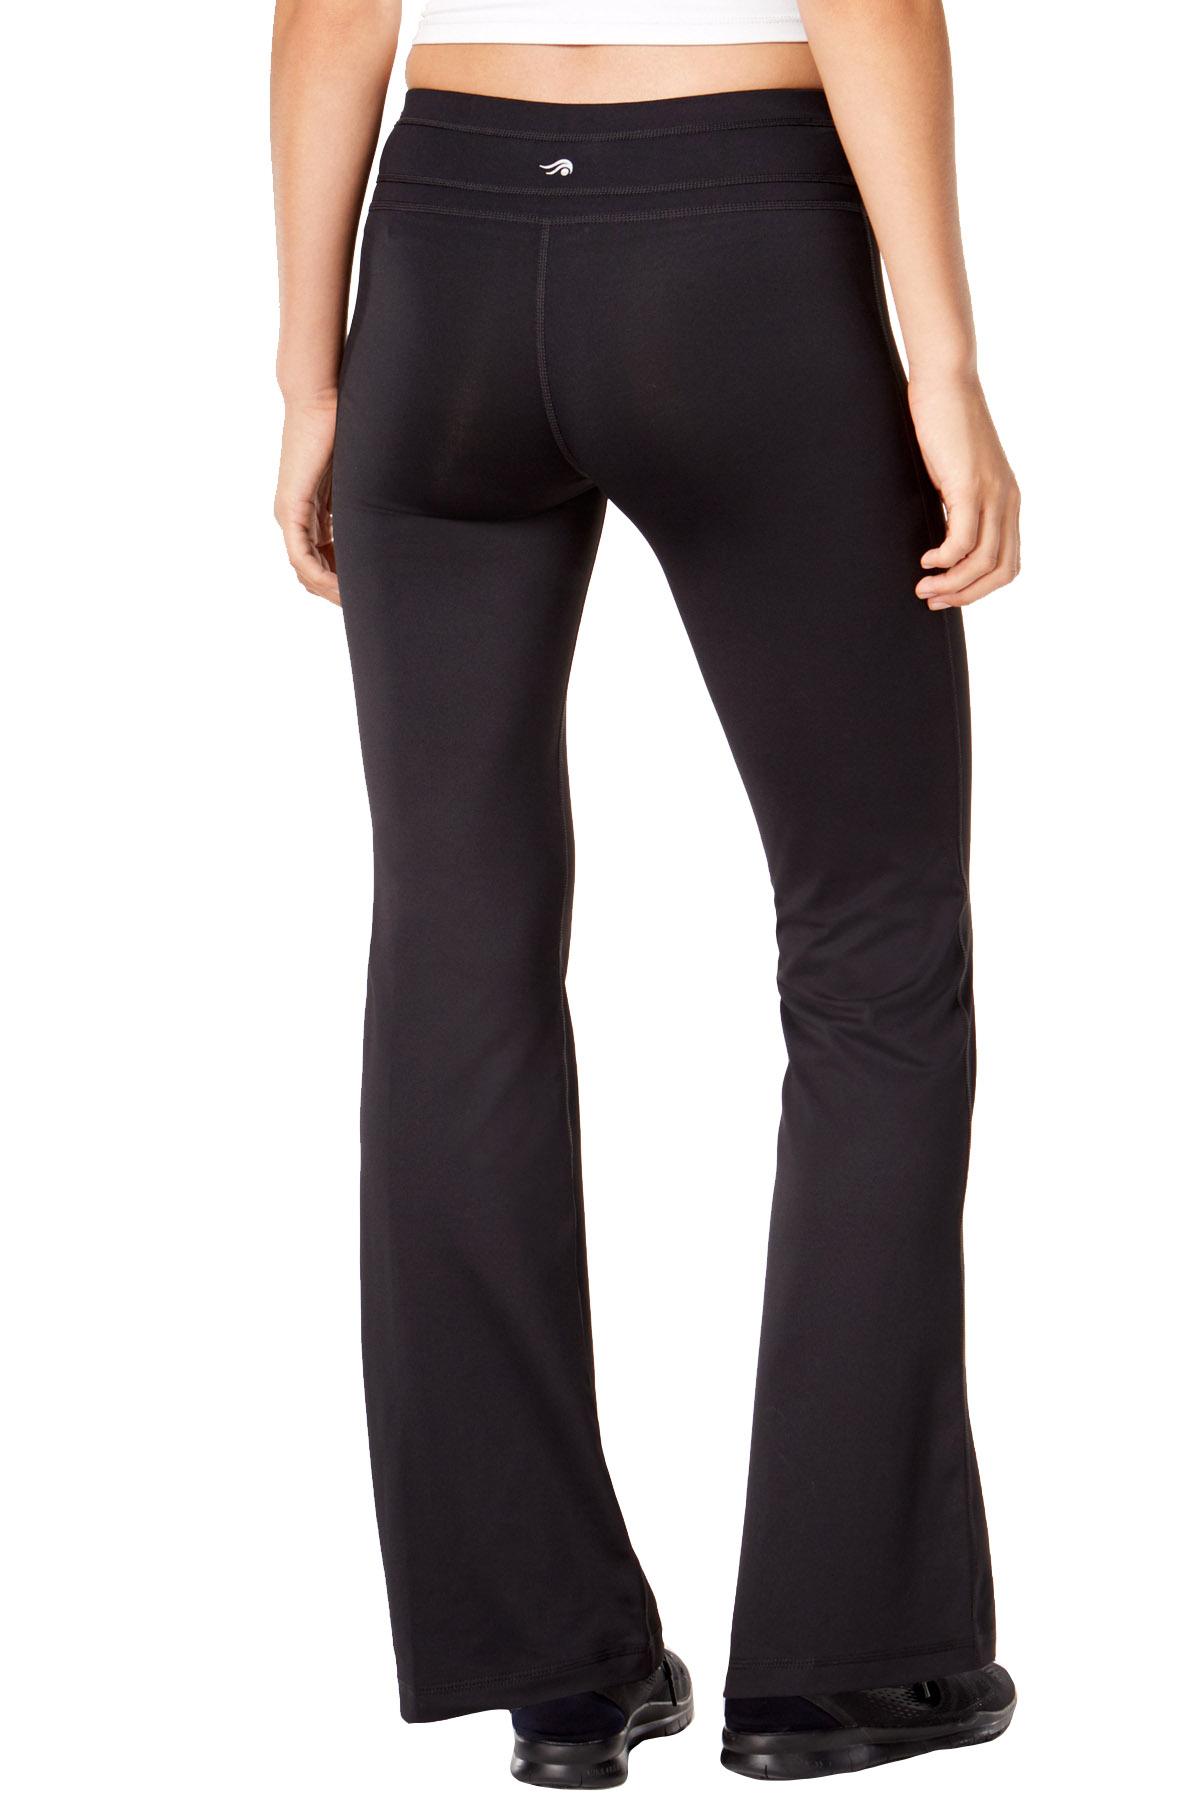 Frontwalk Bootcut Yoga Pants with Pockets for Women High Waist